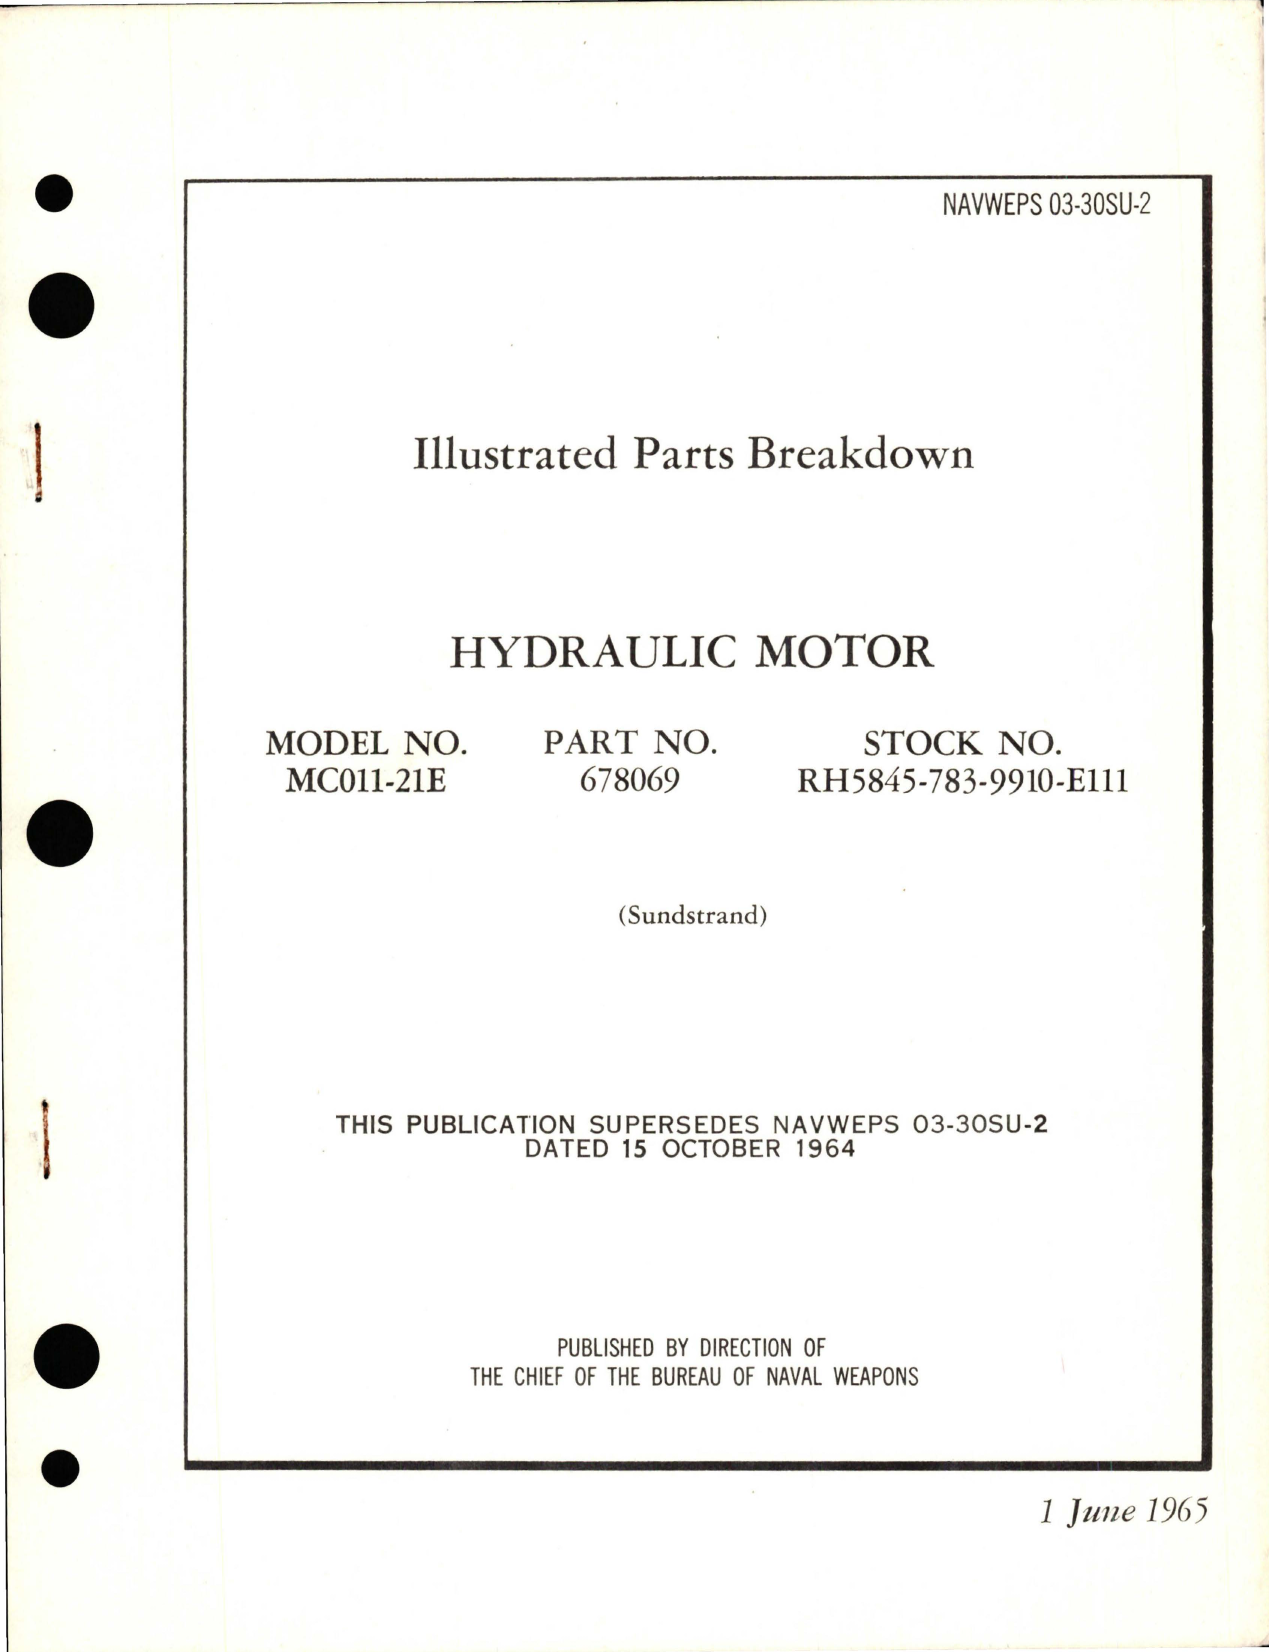 Sample page 1 from AirCorps Library document: Illustrated Parts Breakdown for Hydraulic Motor - Model MC011-21E - Part 678069